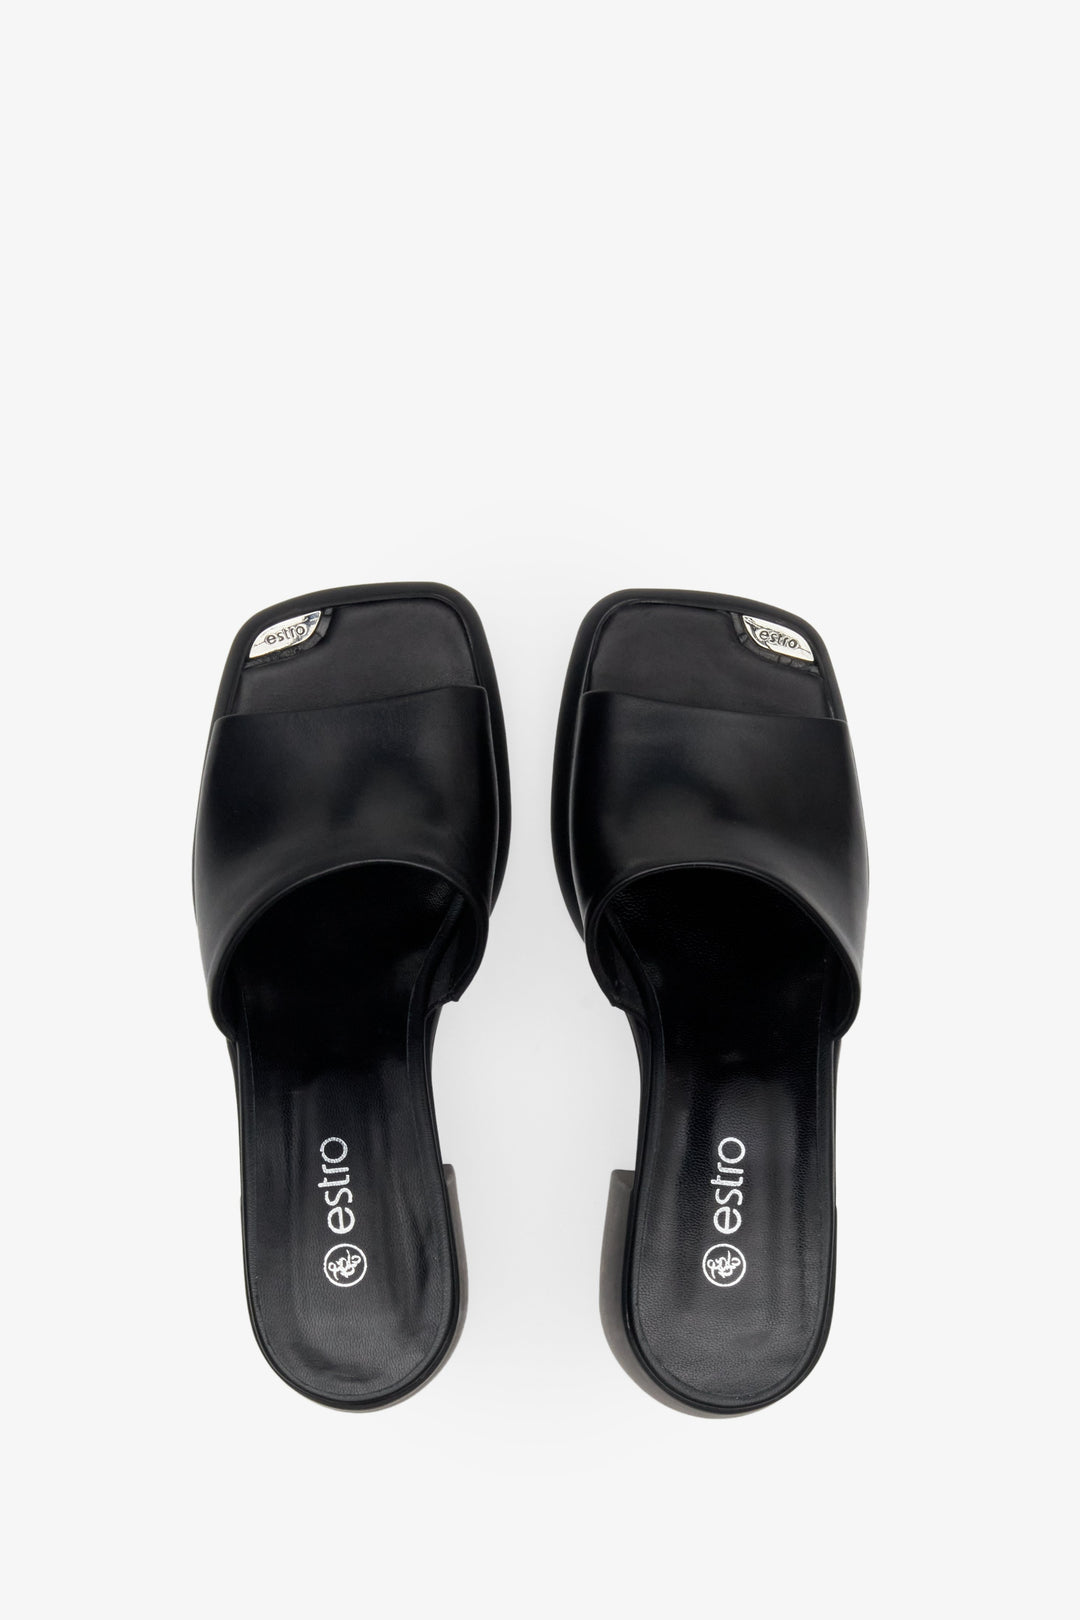 Women's mules in black color with block heels - presentation of footwear from above.